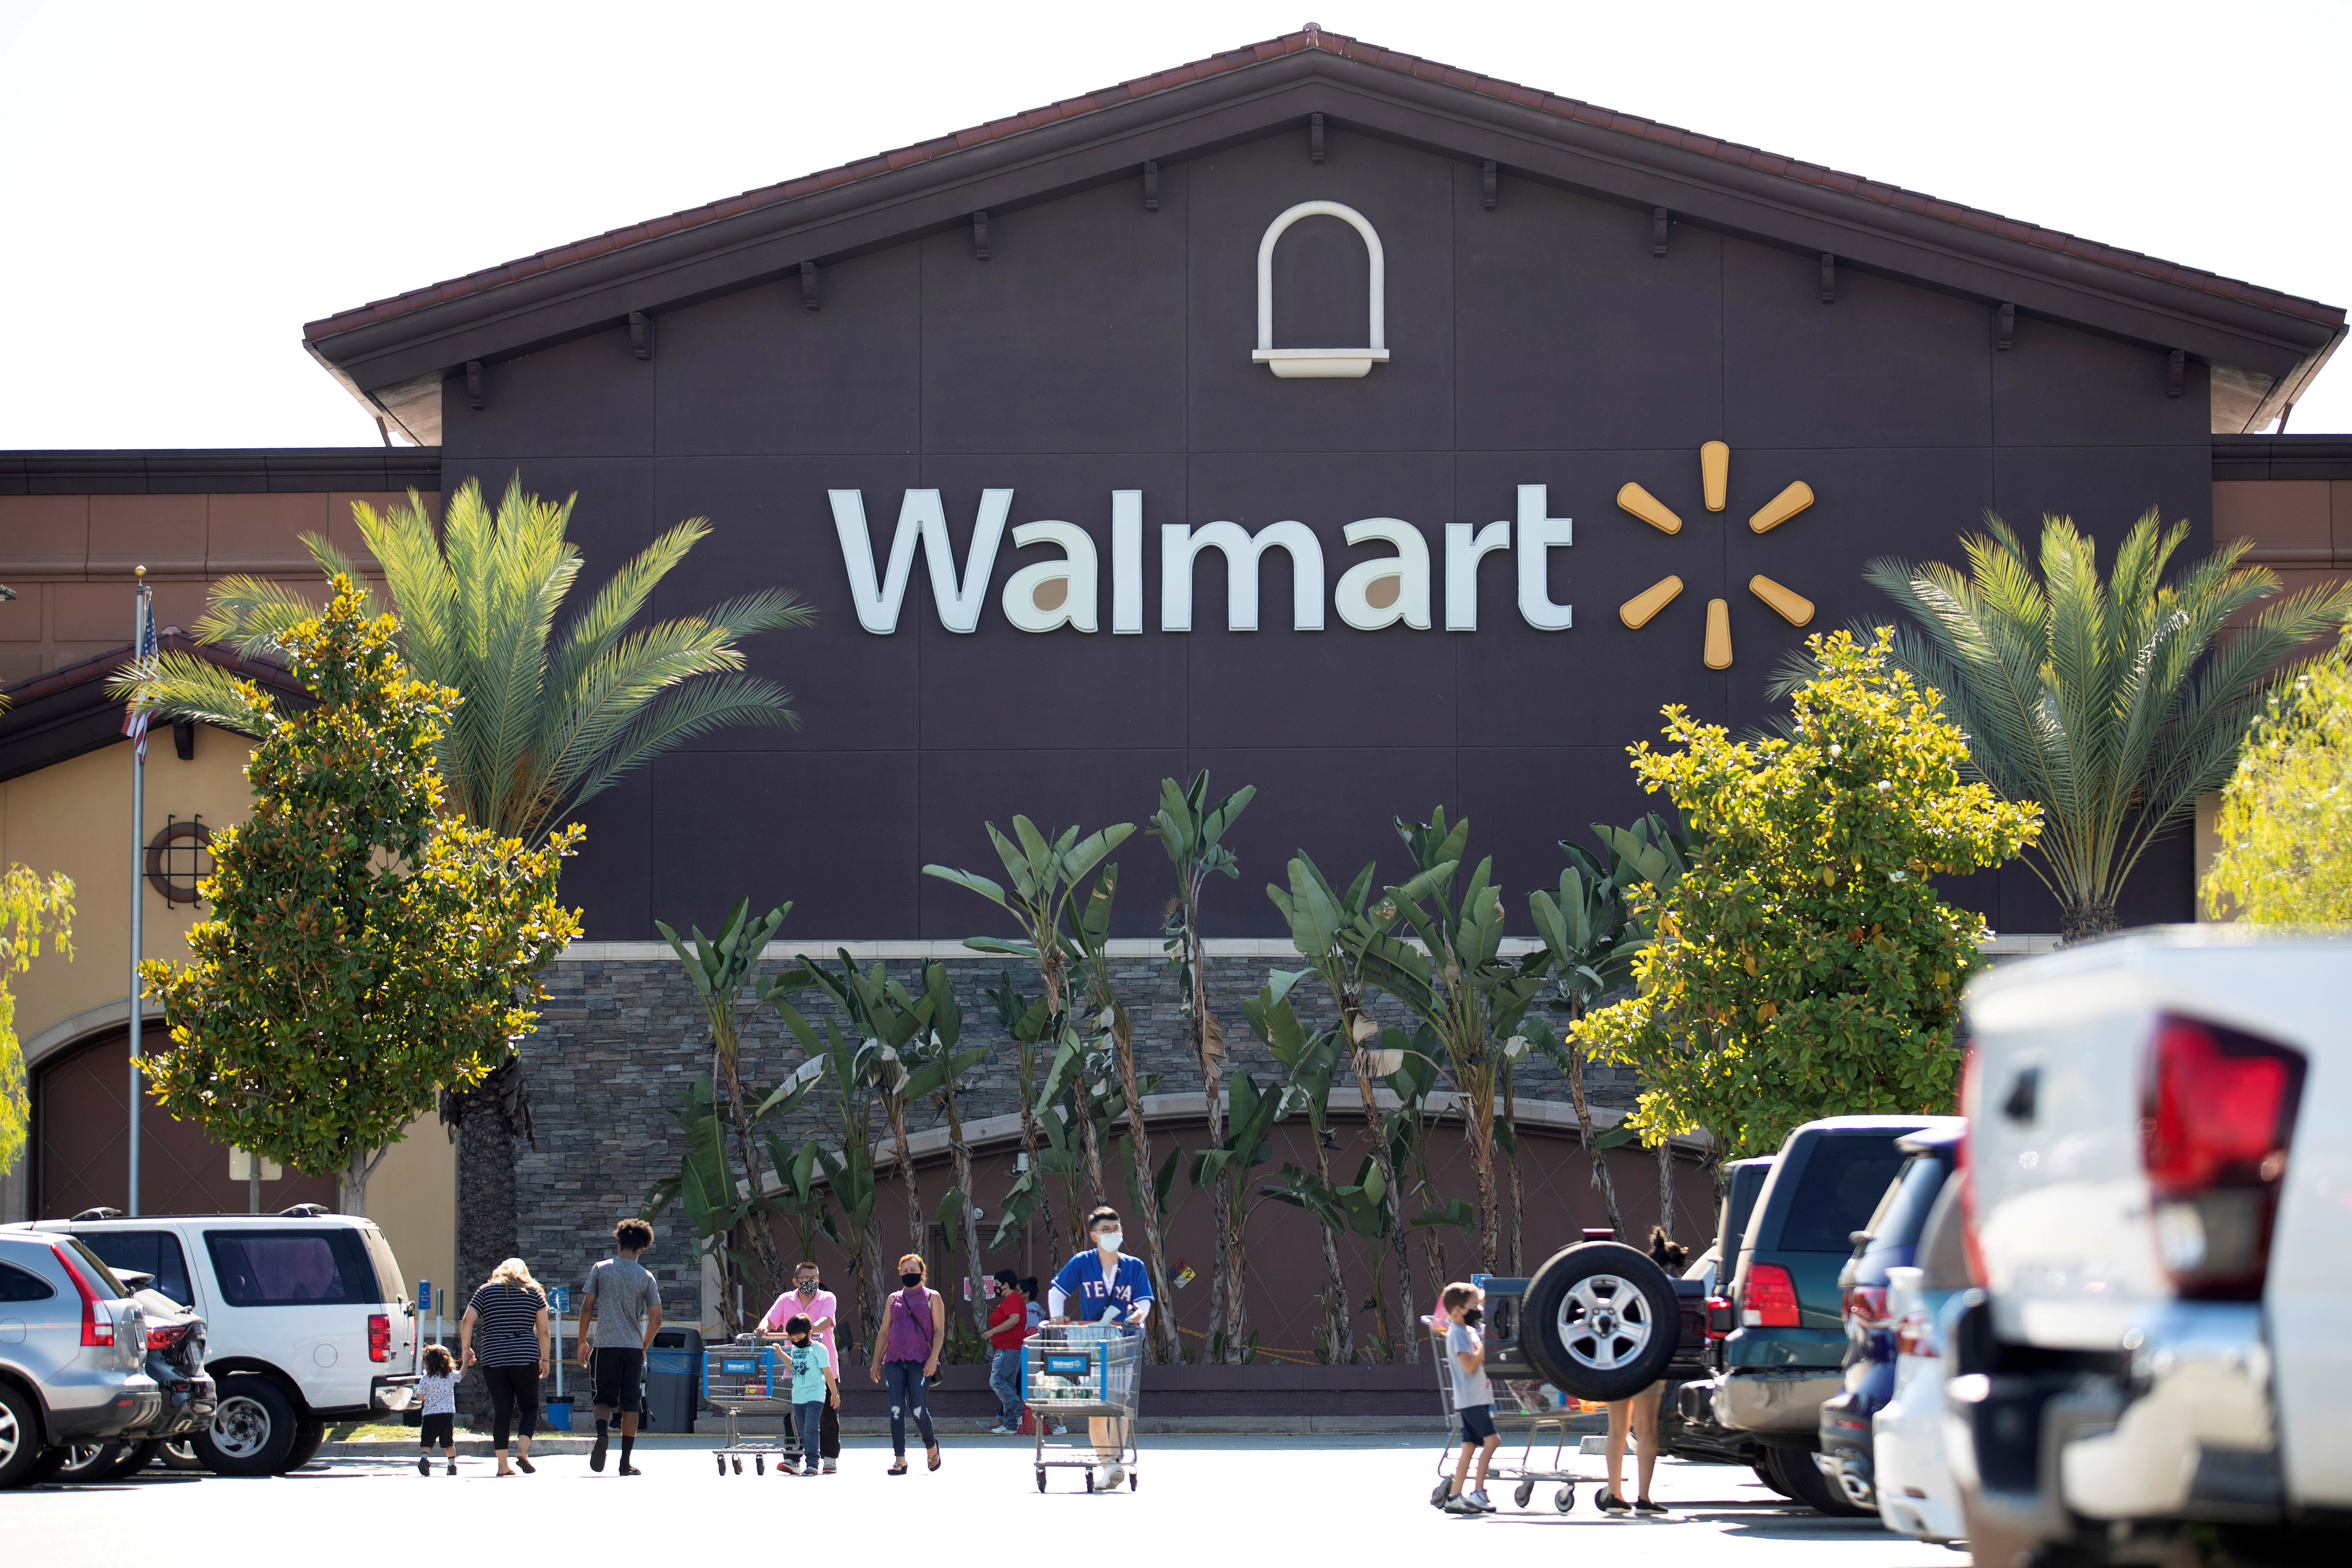 Shoppers wearing face masks are pictured in the parking of a Walmart Superstore during the outbreak of the coronavirus disease (COVID-19), in Rosemead, California, U.S., June 11, 2020. REUTERS/Mario Anzuoni